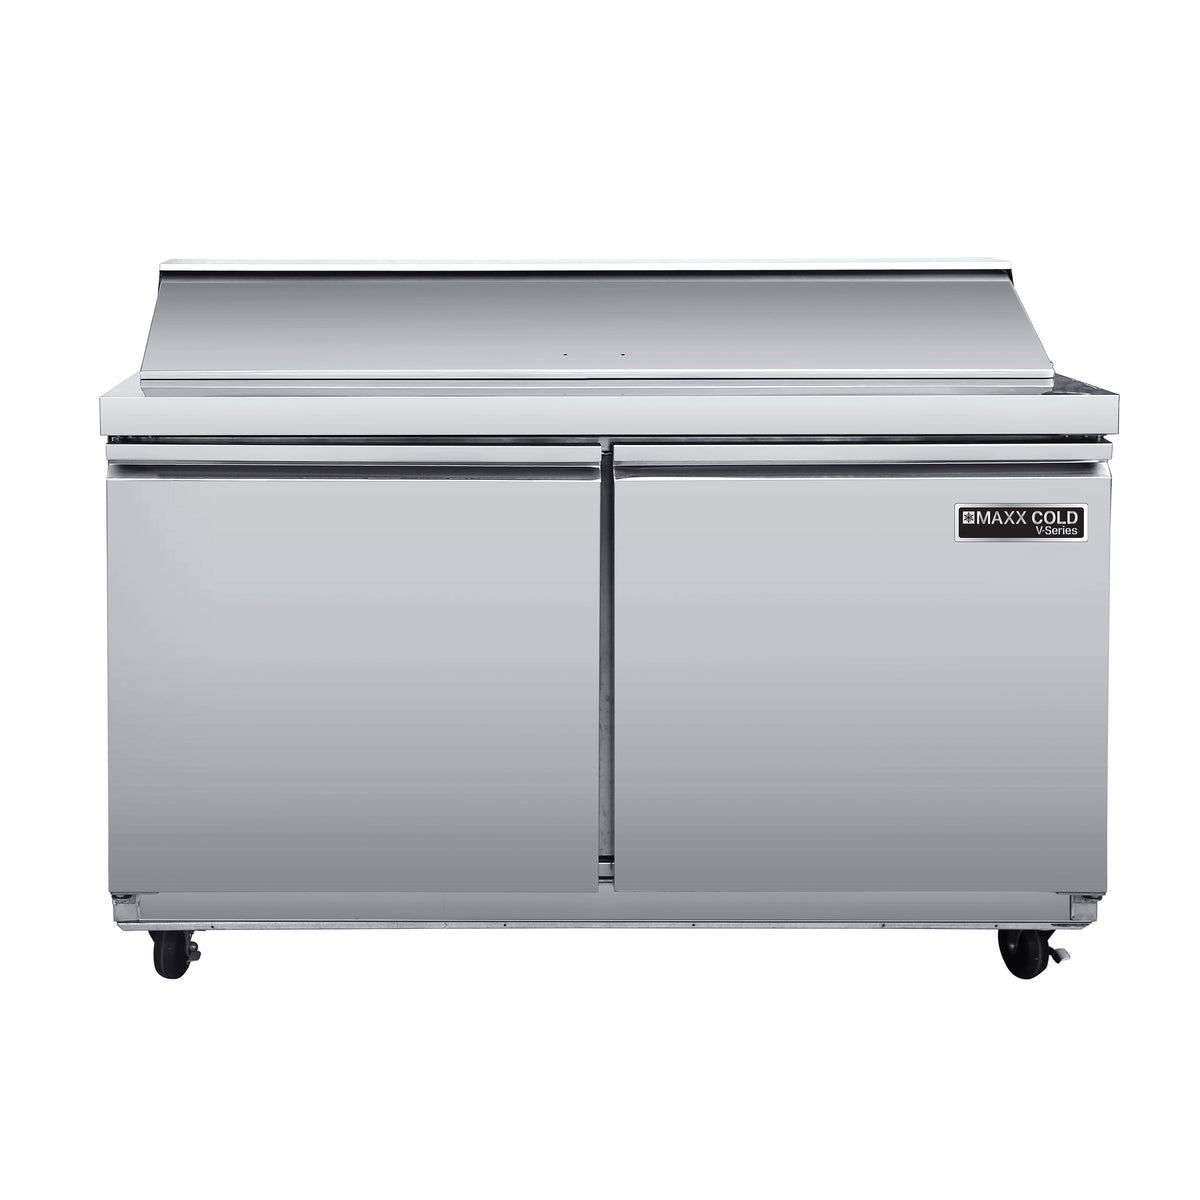 Maxx Cold MVR48SHC V-Series 2 Door Refrigerated Sandwich and Salad Prep Station, 48"W, 13.2 cu ft, in Stainless Steel